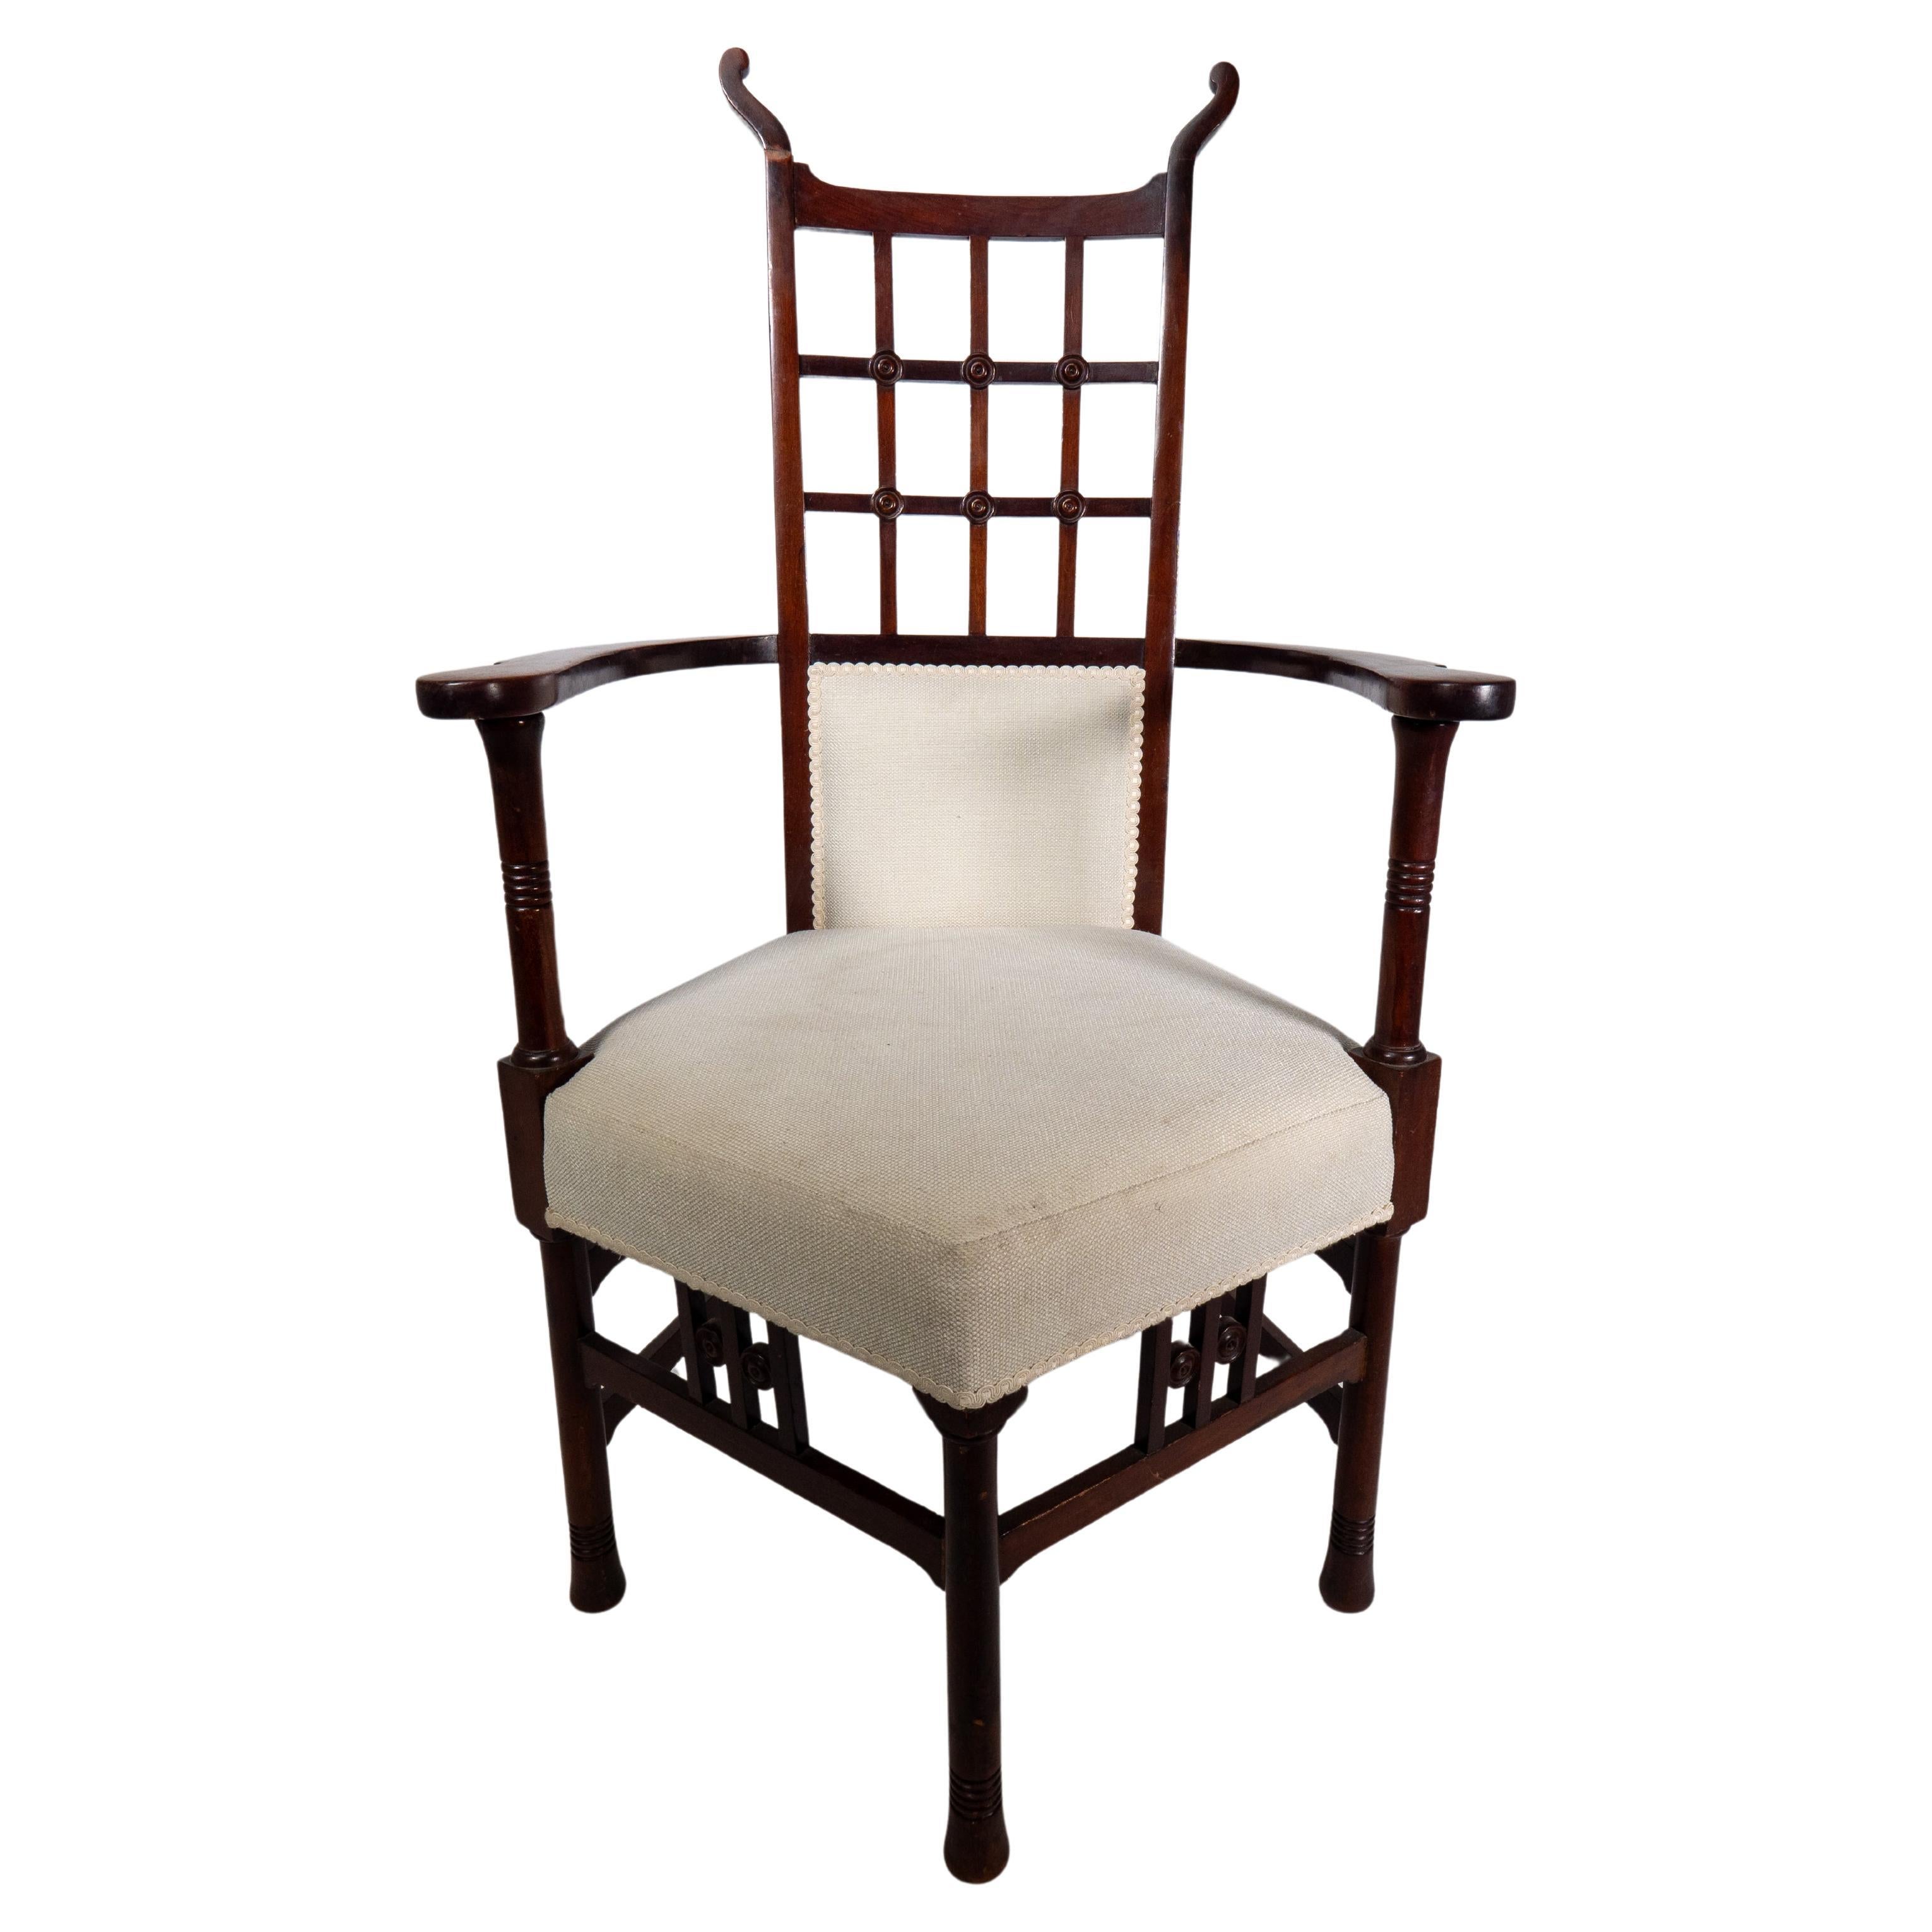 Liberty and Co in the style of probably made by William Birch. 
An Arts and Crafts mahogany armchair with curled finials, and a lattice back support ring turned details to the arm supports and also to the five legs.
